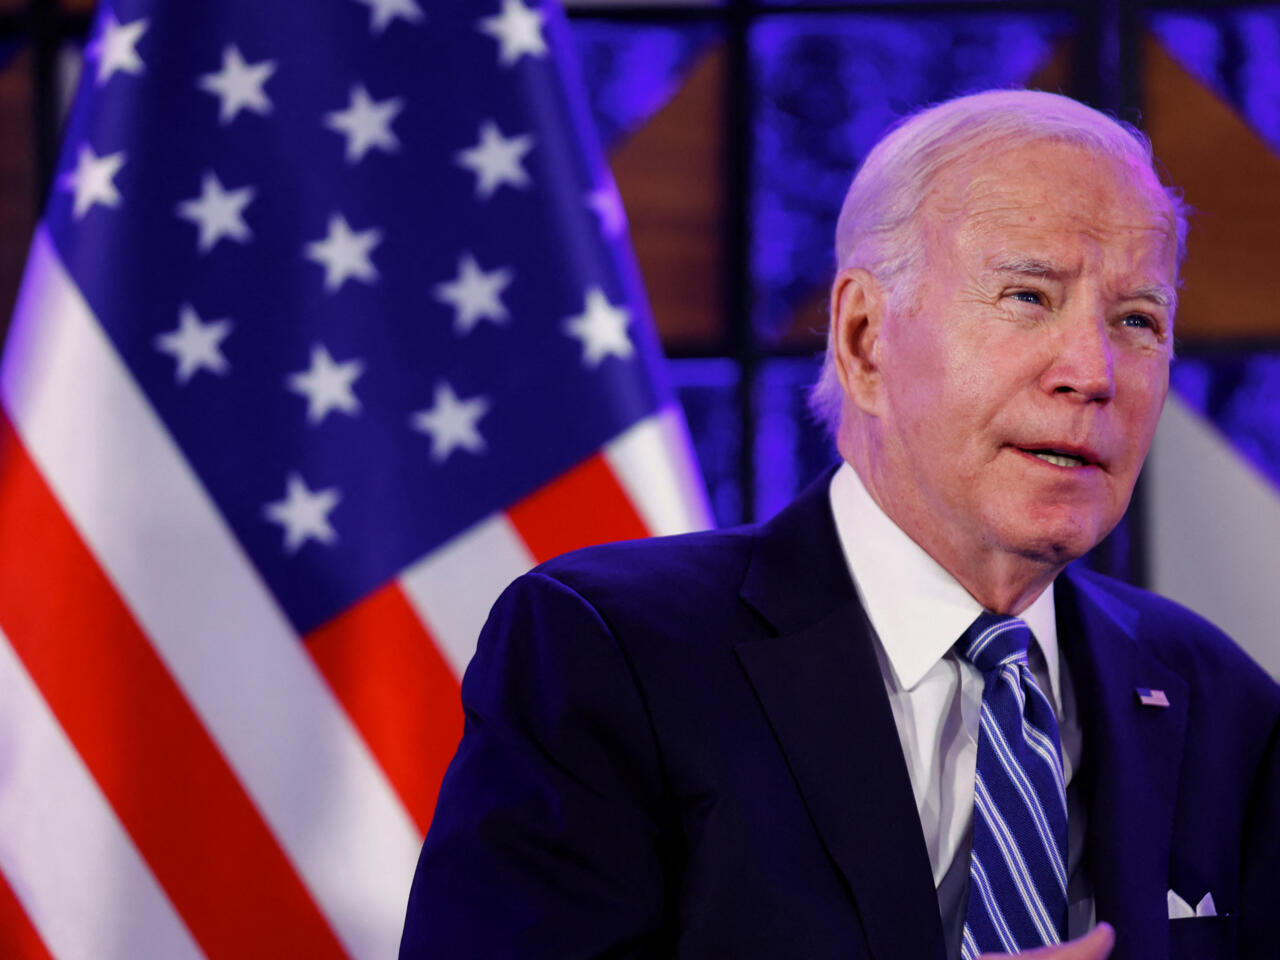 Biden faces internal pressure to balance support for Israel with humanitarian concerns (Credits: Reuters)